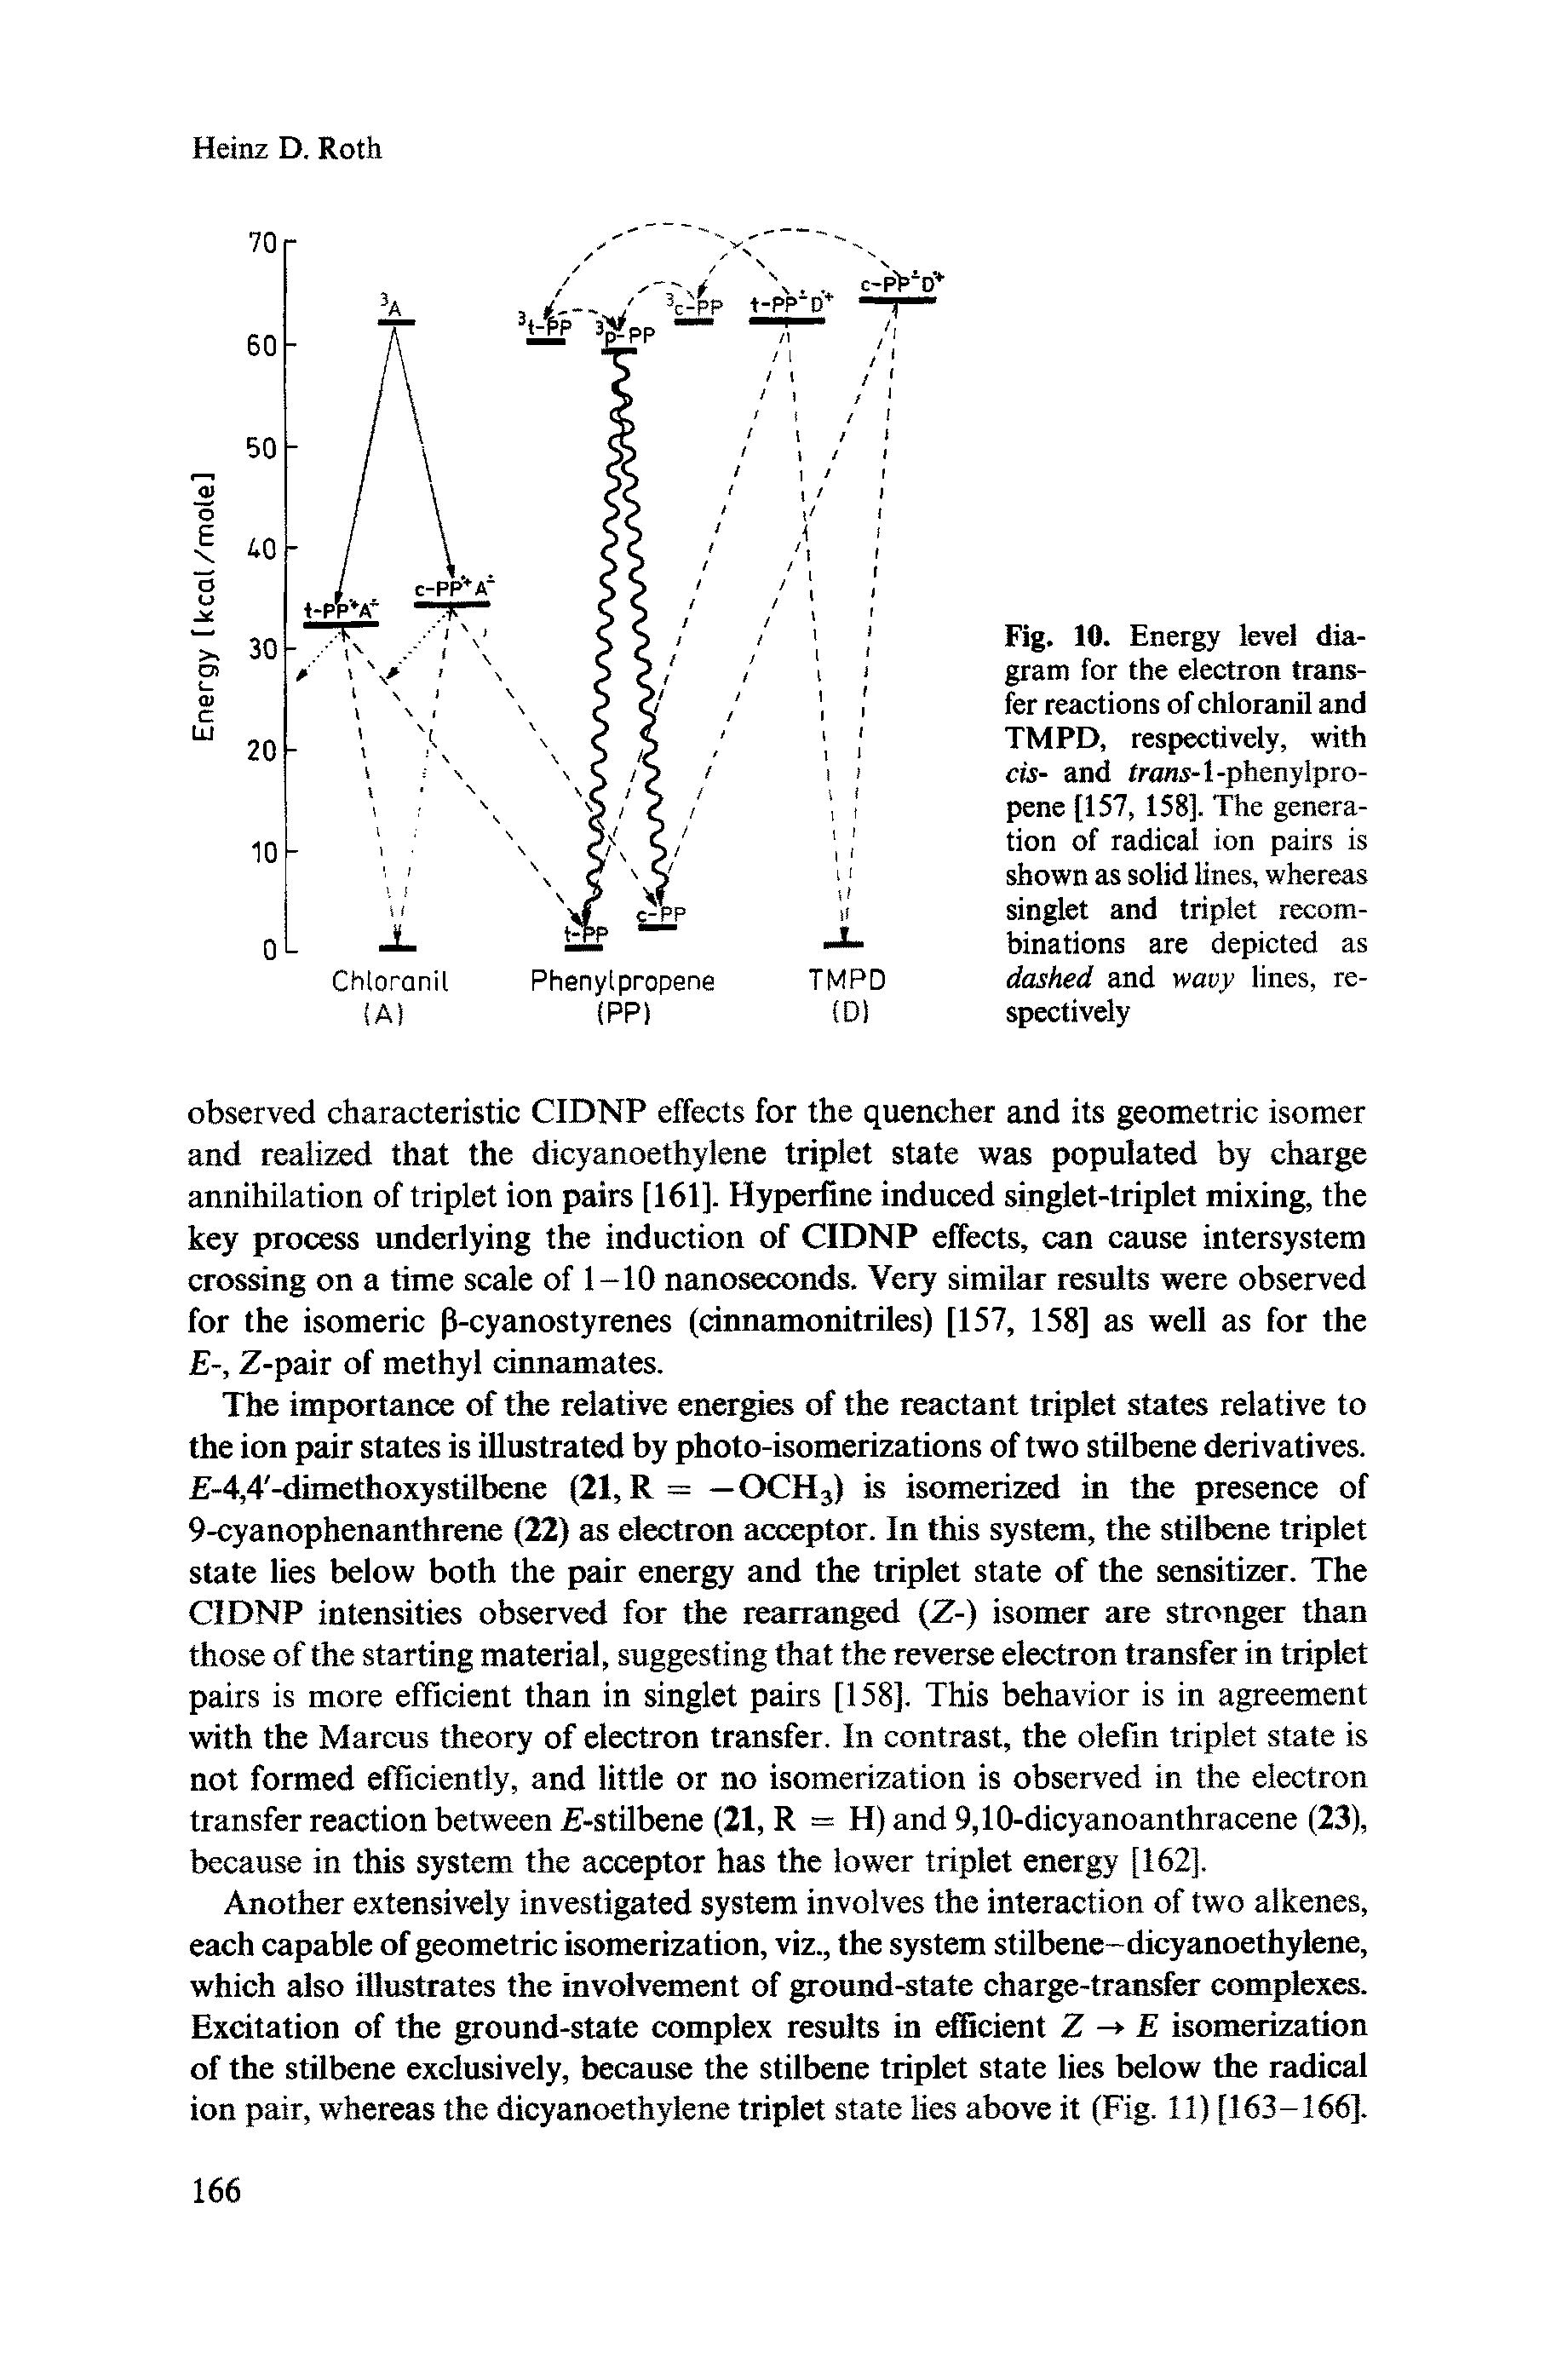 Fig. 10. Energy level diagram for the electron transfer reactions of chloranil and TMPD, respectively, with cis- and frans-l-phenylpro-pene [157, 158]. The generation of radical ion pairs is shown as solid lines, whereas singlet and triplet recombinations are depicted as dashed and wavy lines, respectively...